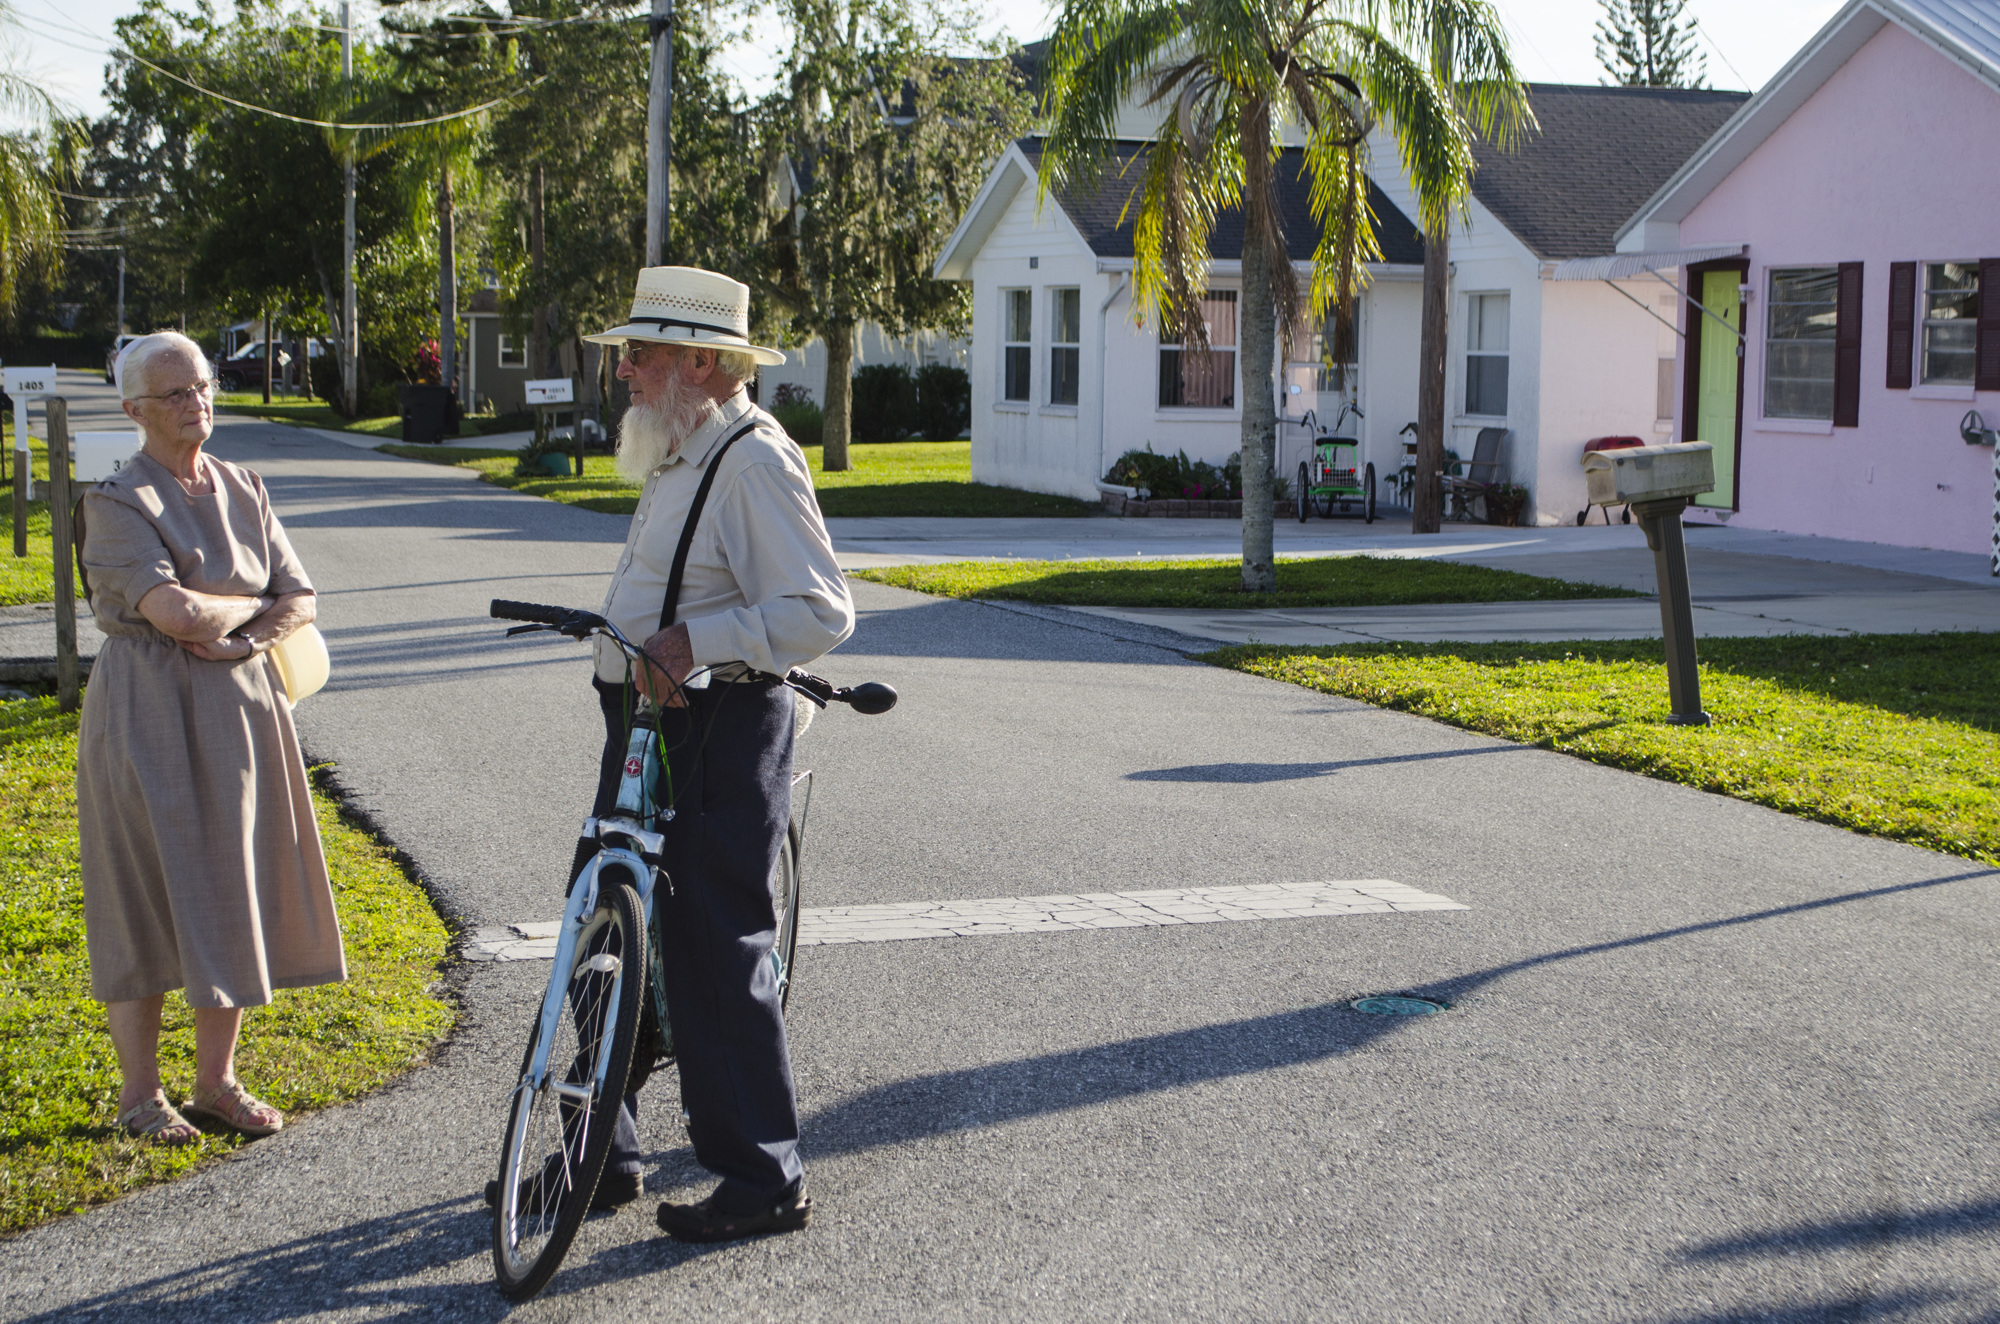 Cycling and walking are popular models of transportation in the Pinecraft neighborhood.